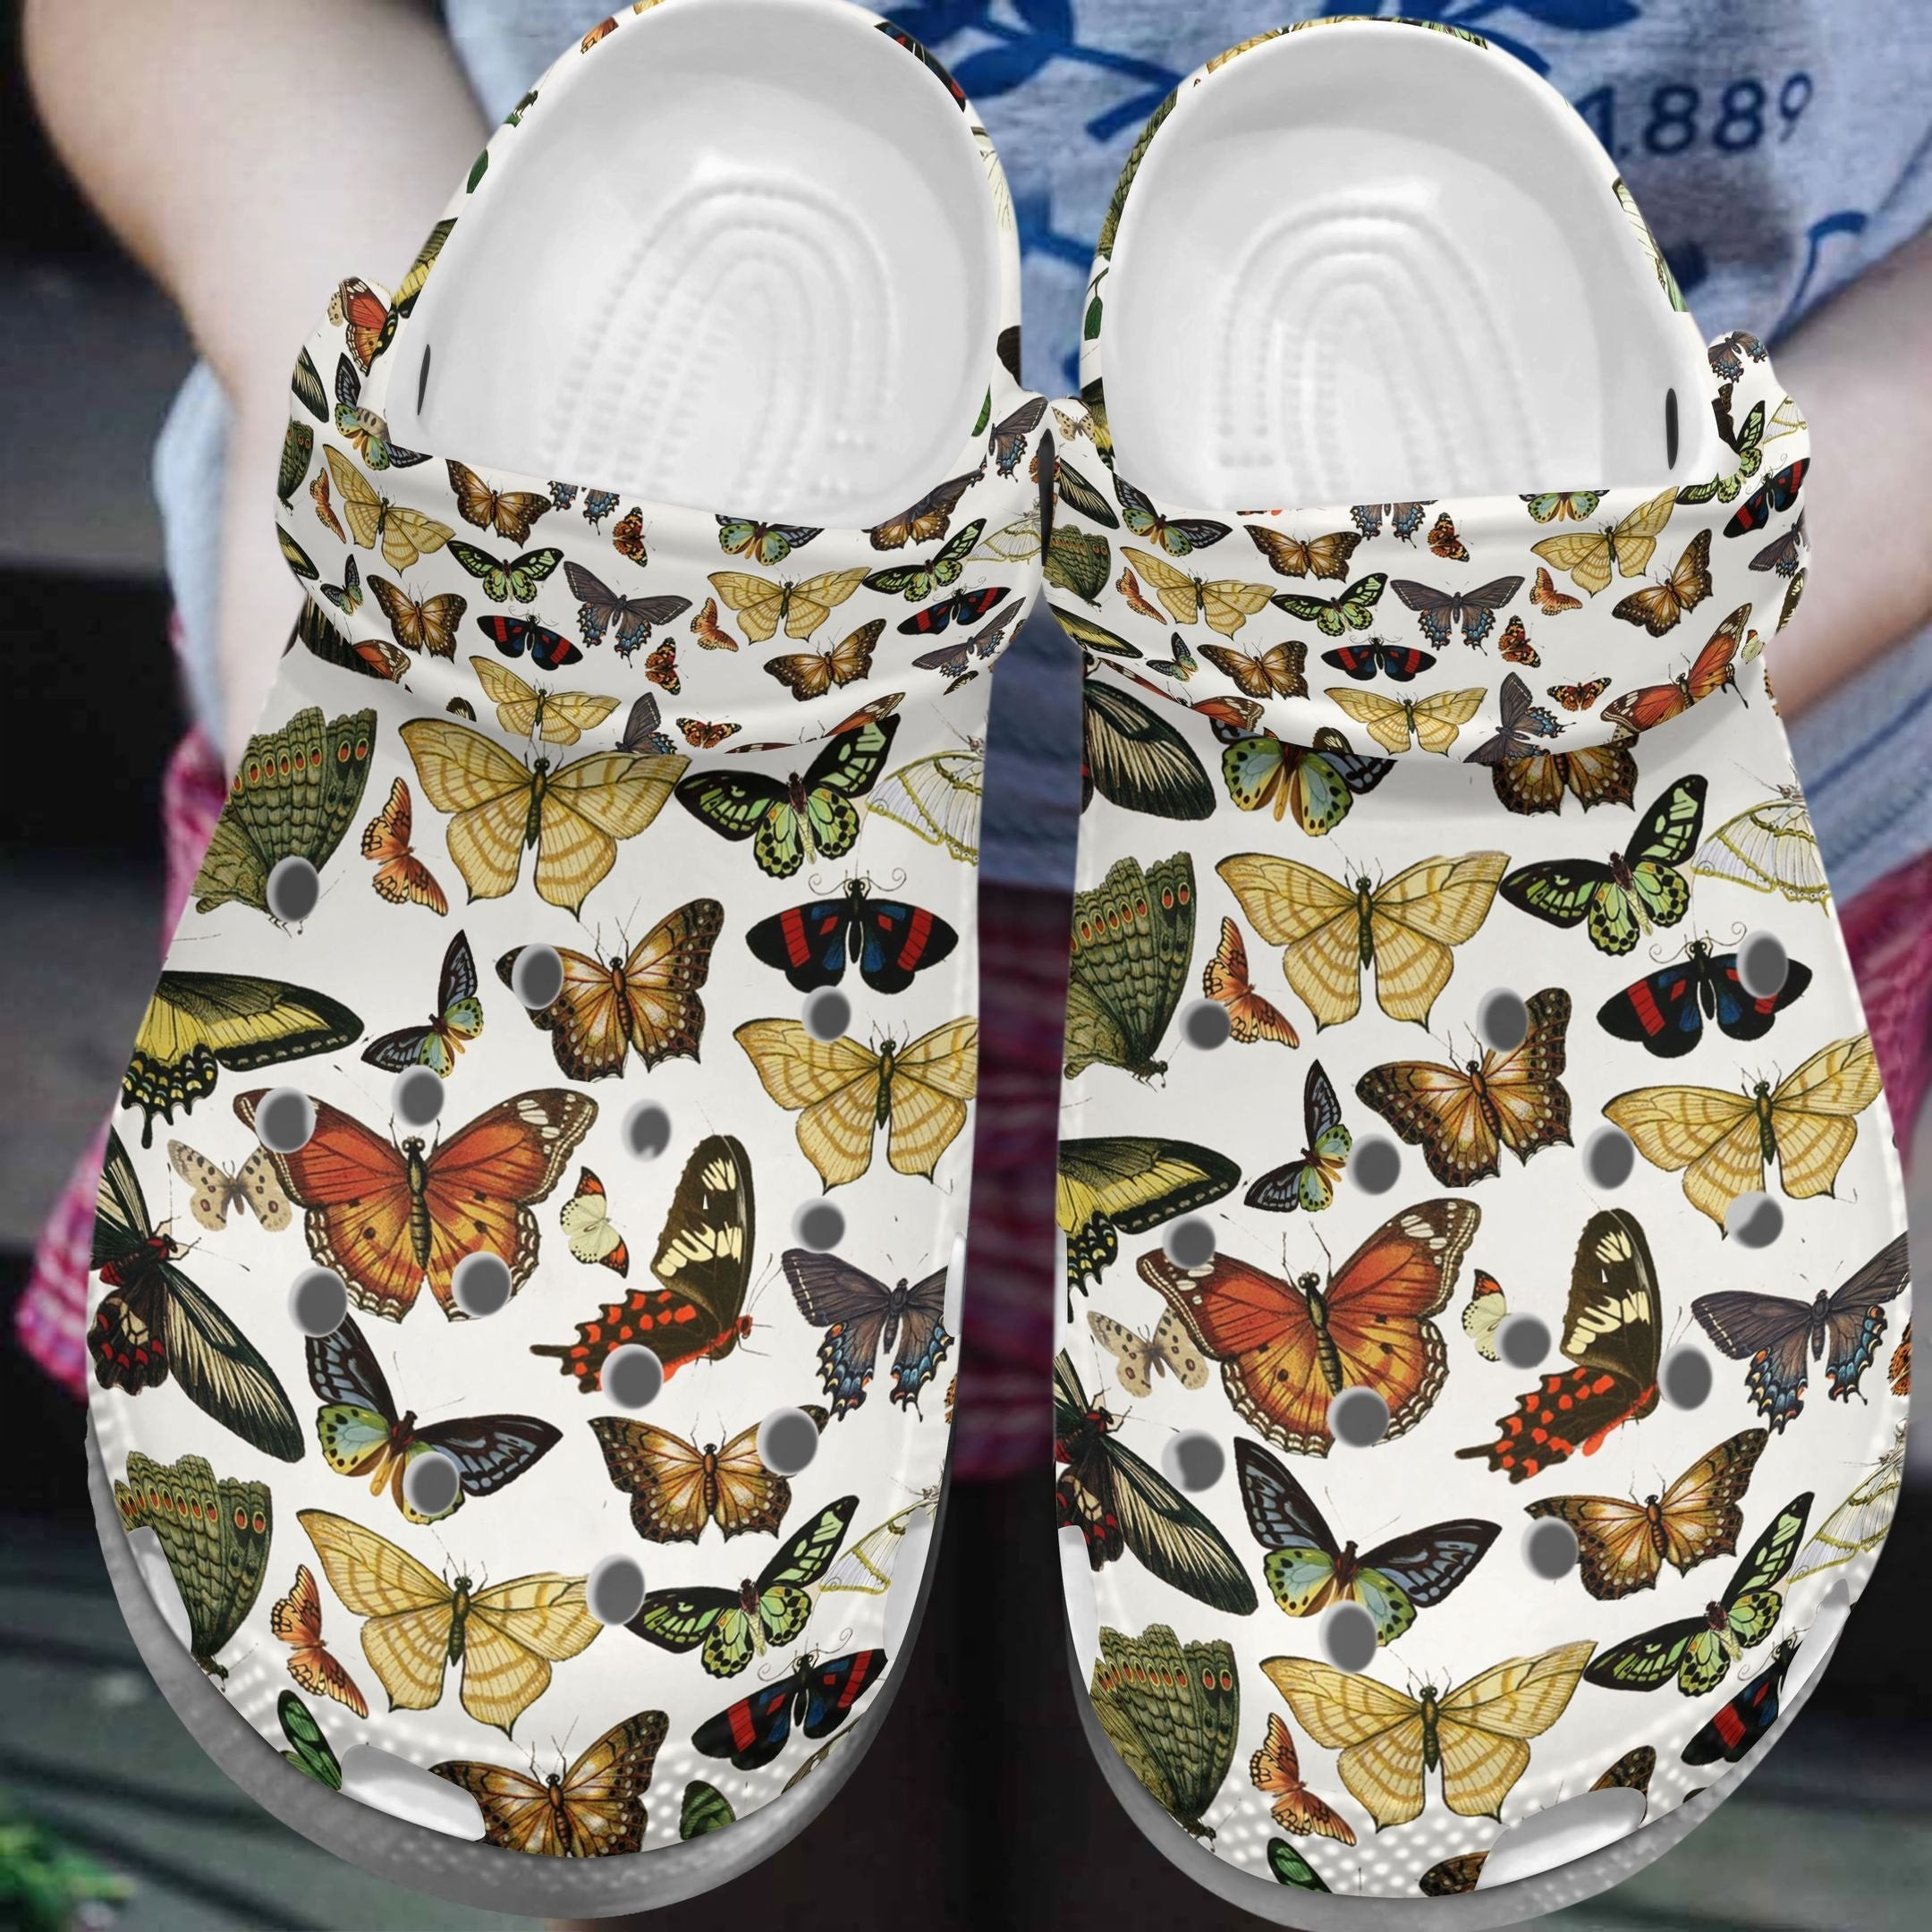 Butterflies Life Croc Shoes For Mother Day - Animal Shoes Clog